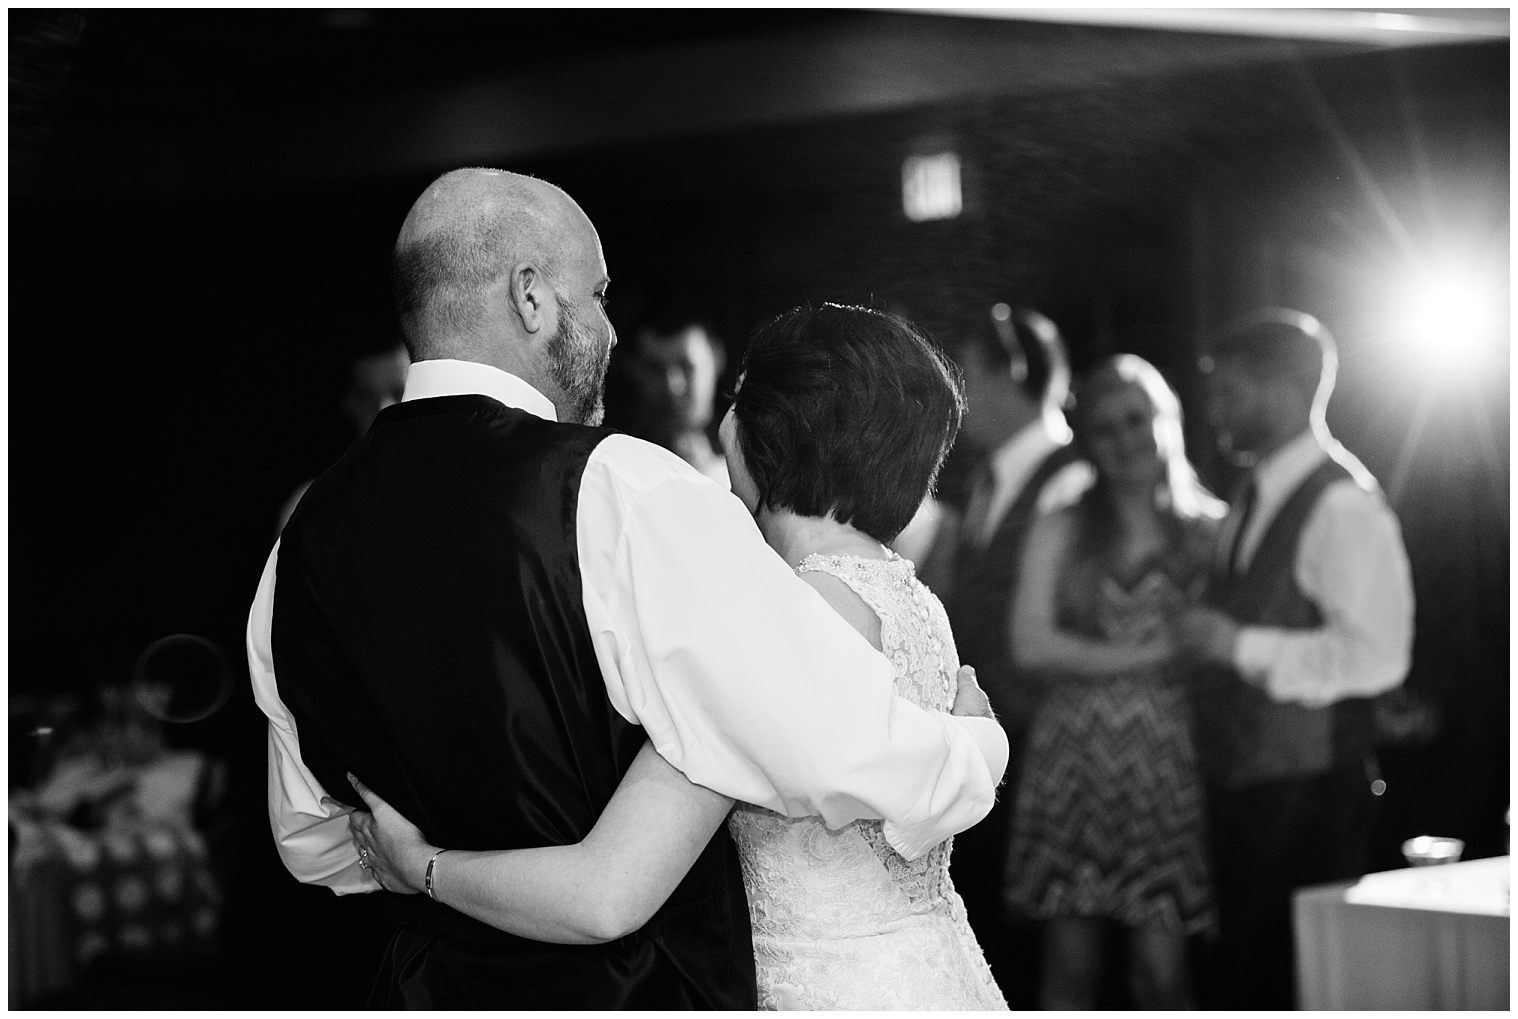 Bride dances with her father during their father-daughter dance at her Breckenridge mountain wedding.